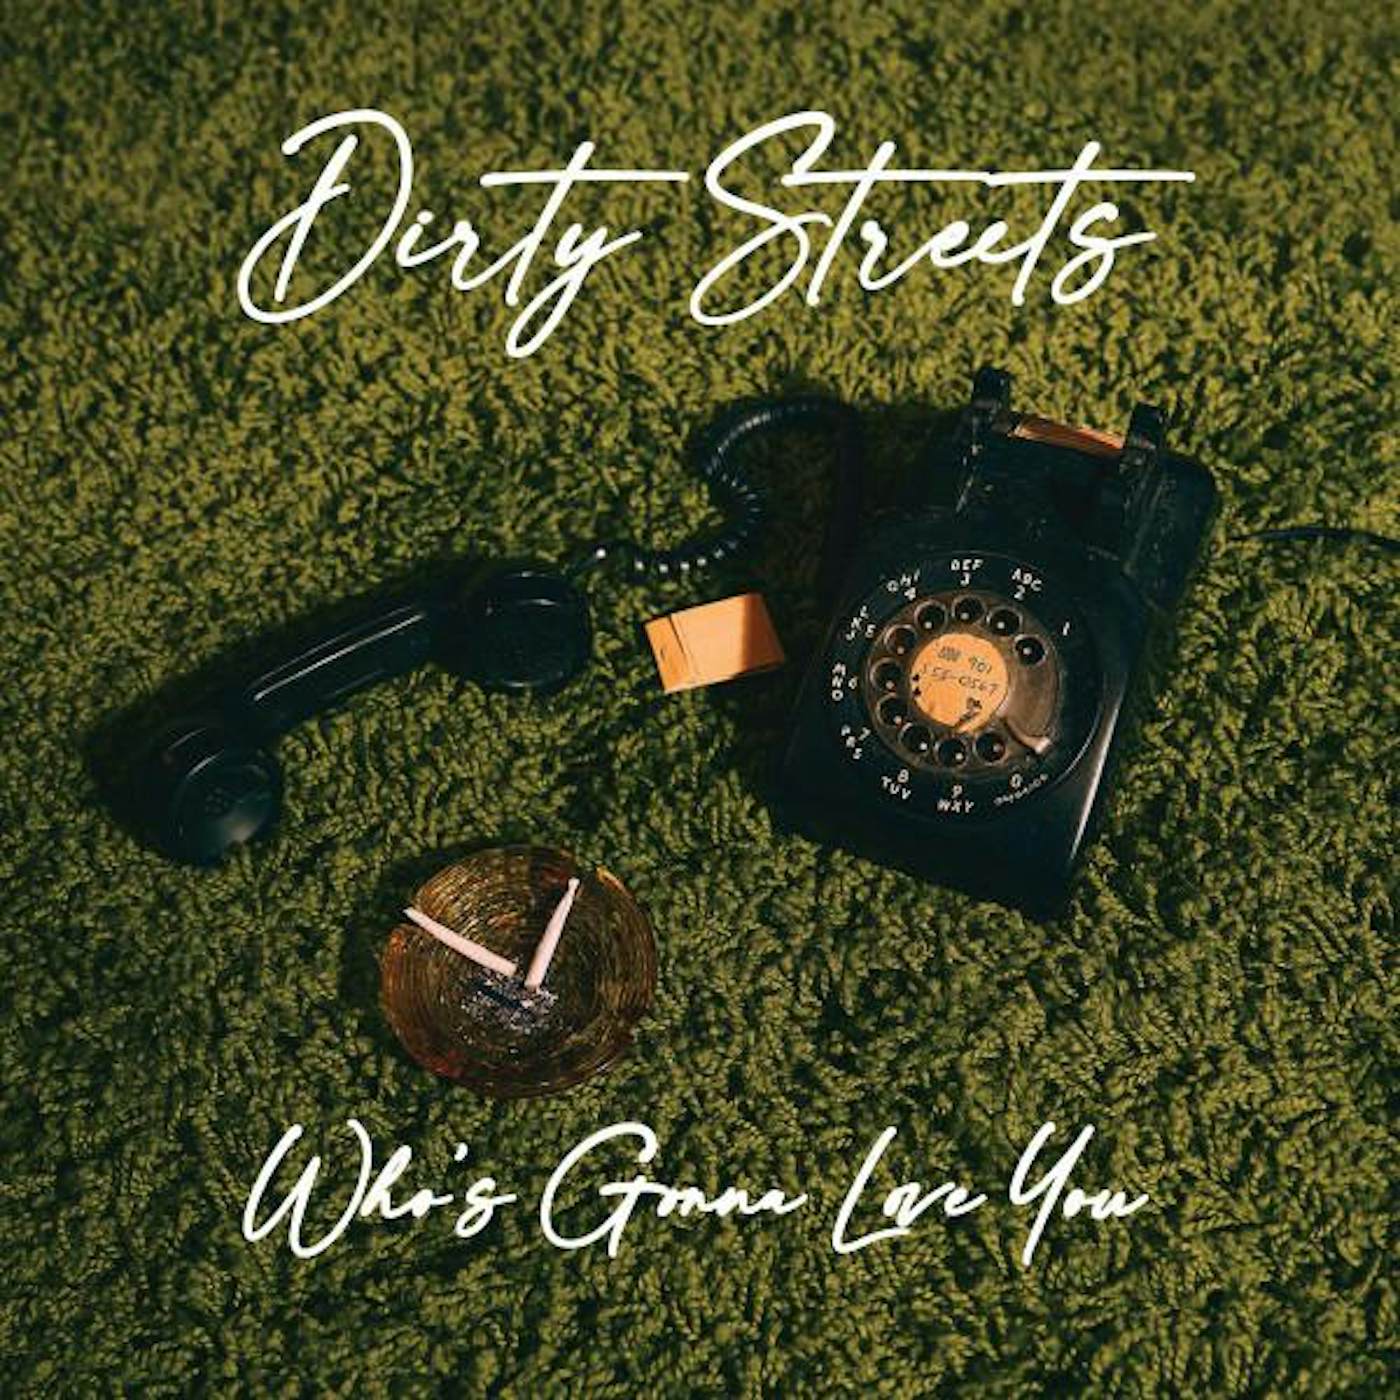 Dirty Streets Who's Gonna Love You Vinyl Record